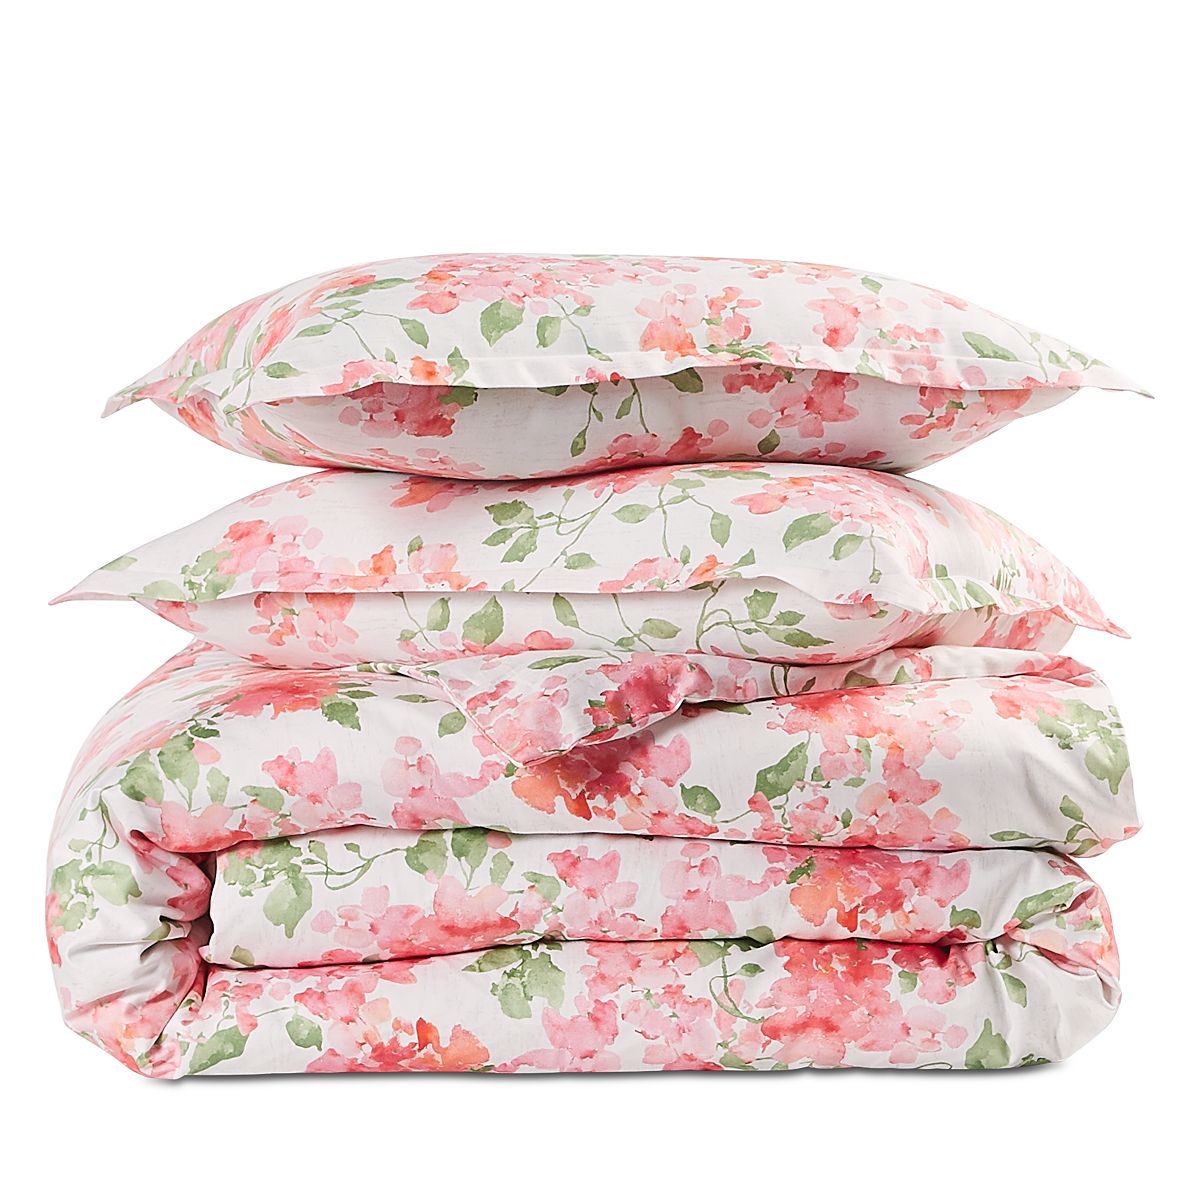 Photo 2 of FULL/QUEEN SKY Blushing Hydrangea Comforter Cover Set
100% COTTON / MACHINE WASHABLE
INCLUDES: Comforter COVER and 2 standard pillow shams